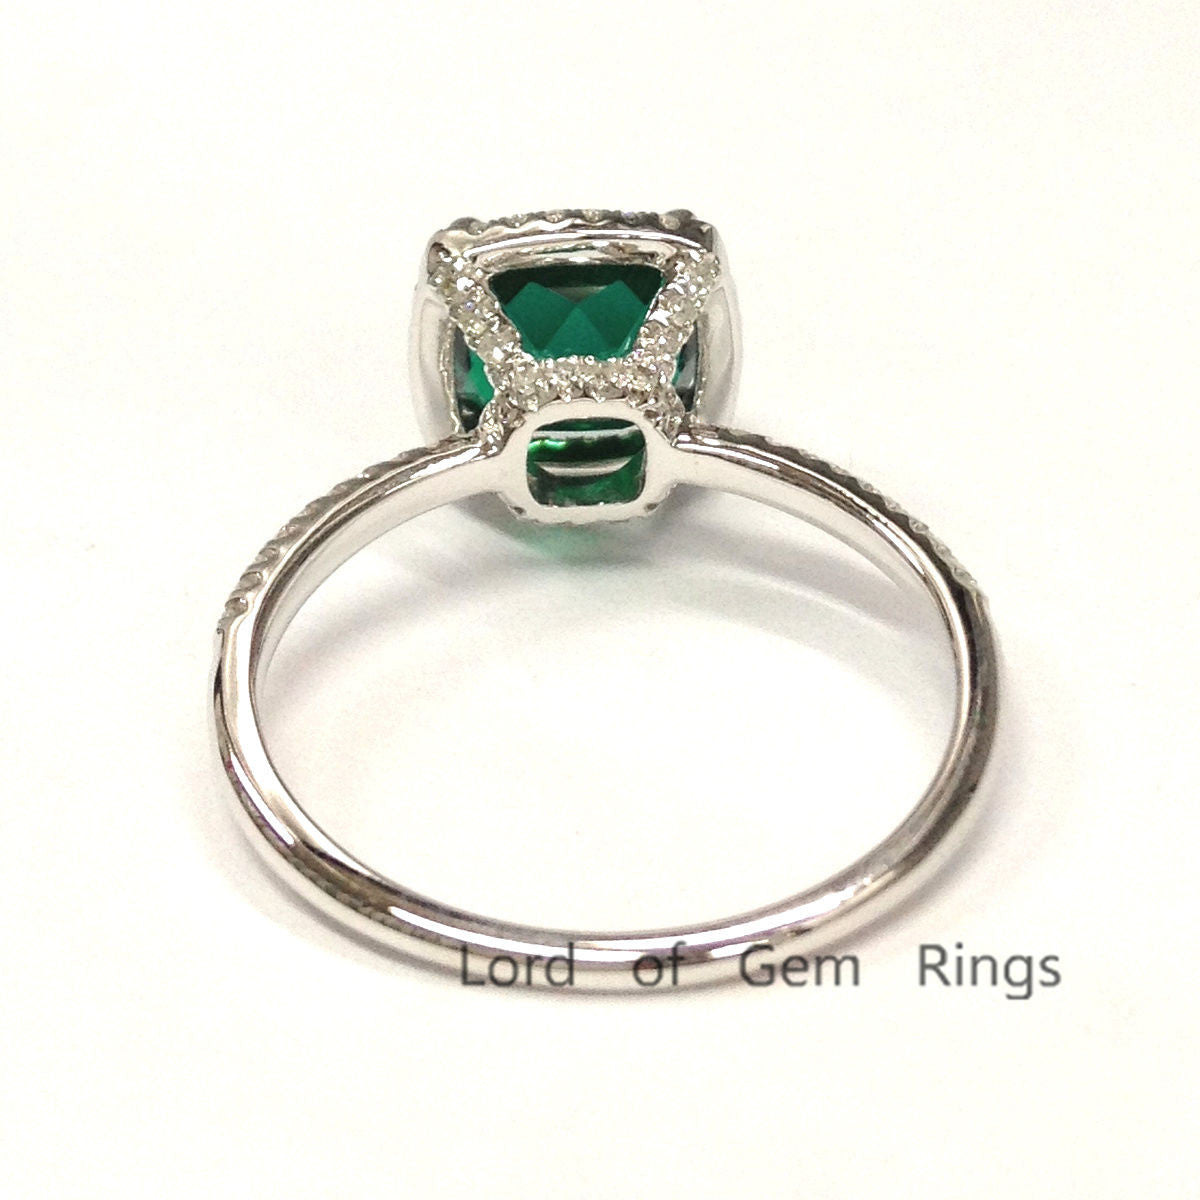 Reserved for Neil, exchange, Cushion Emerald Engagement Ring - Lord of Gem Rings - 3